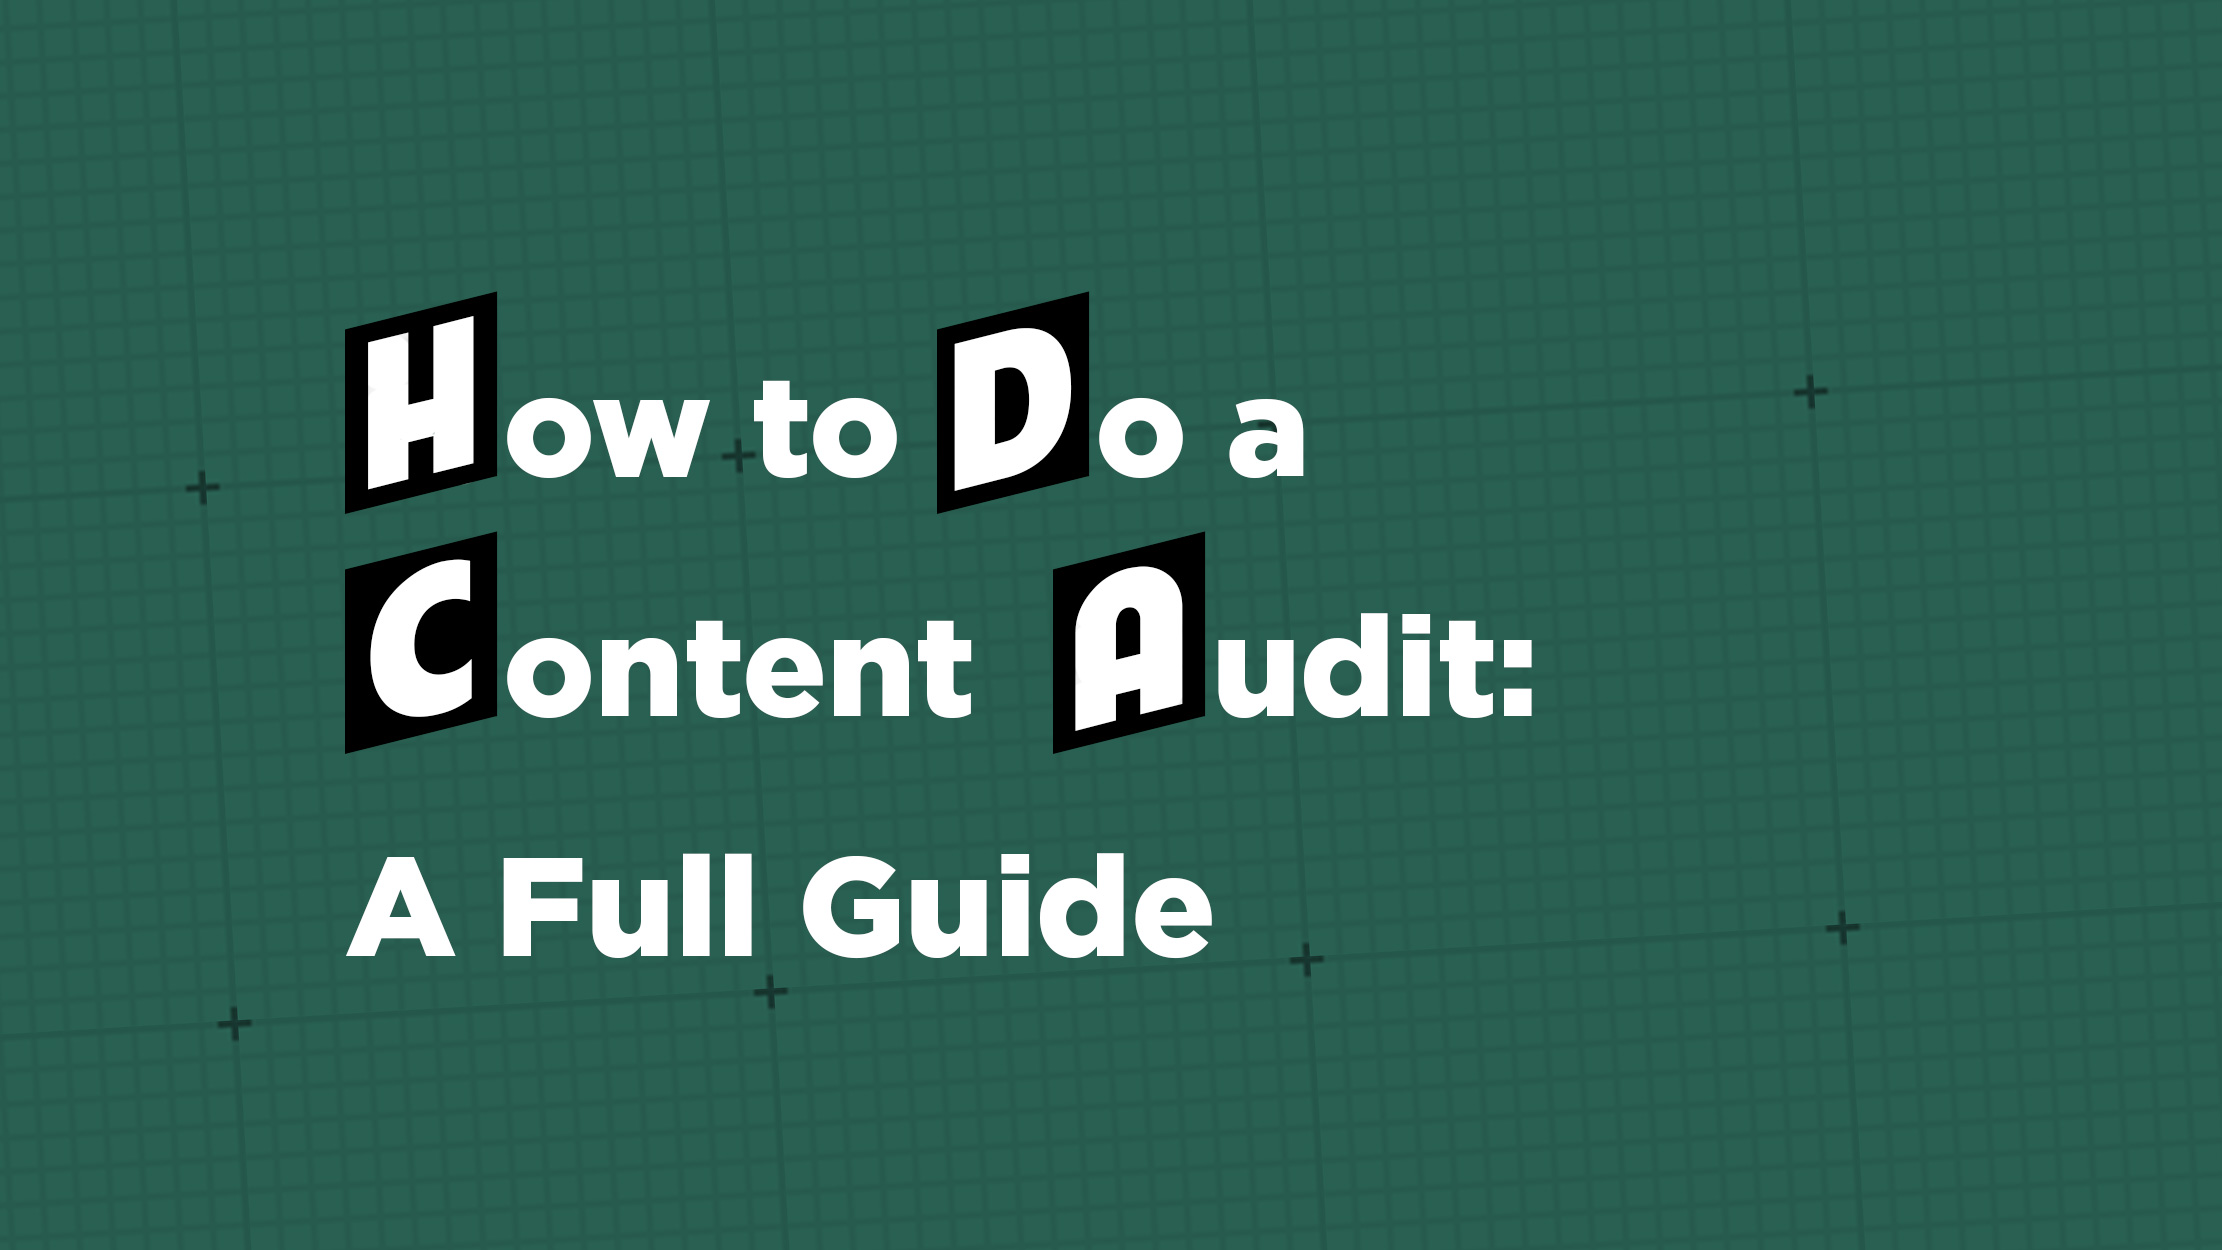 How to Do a Content Audit: A Full Guide